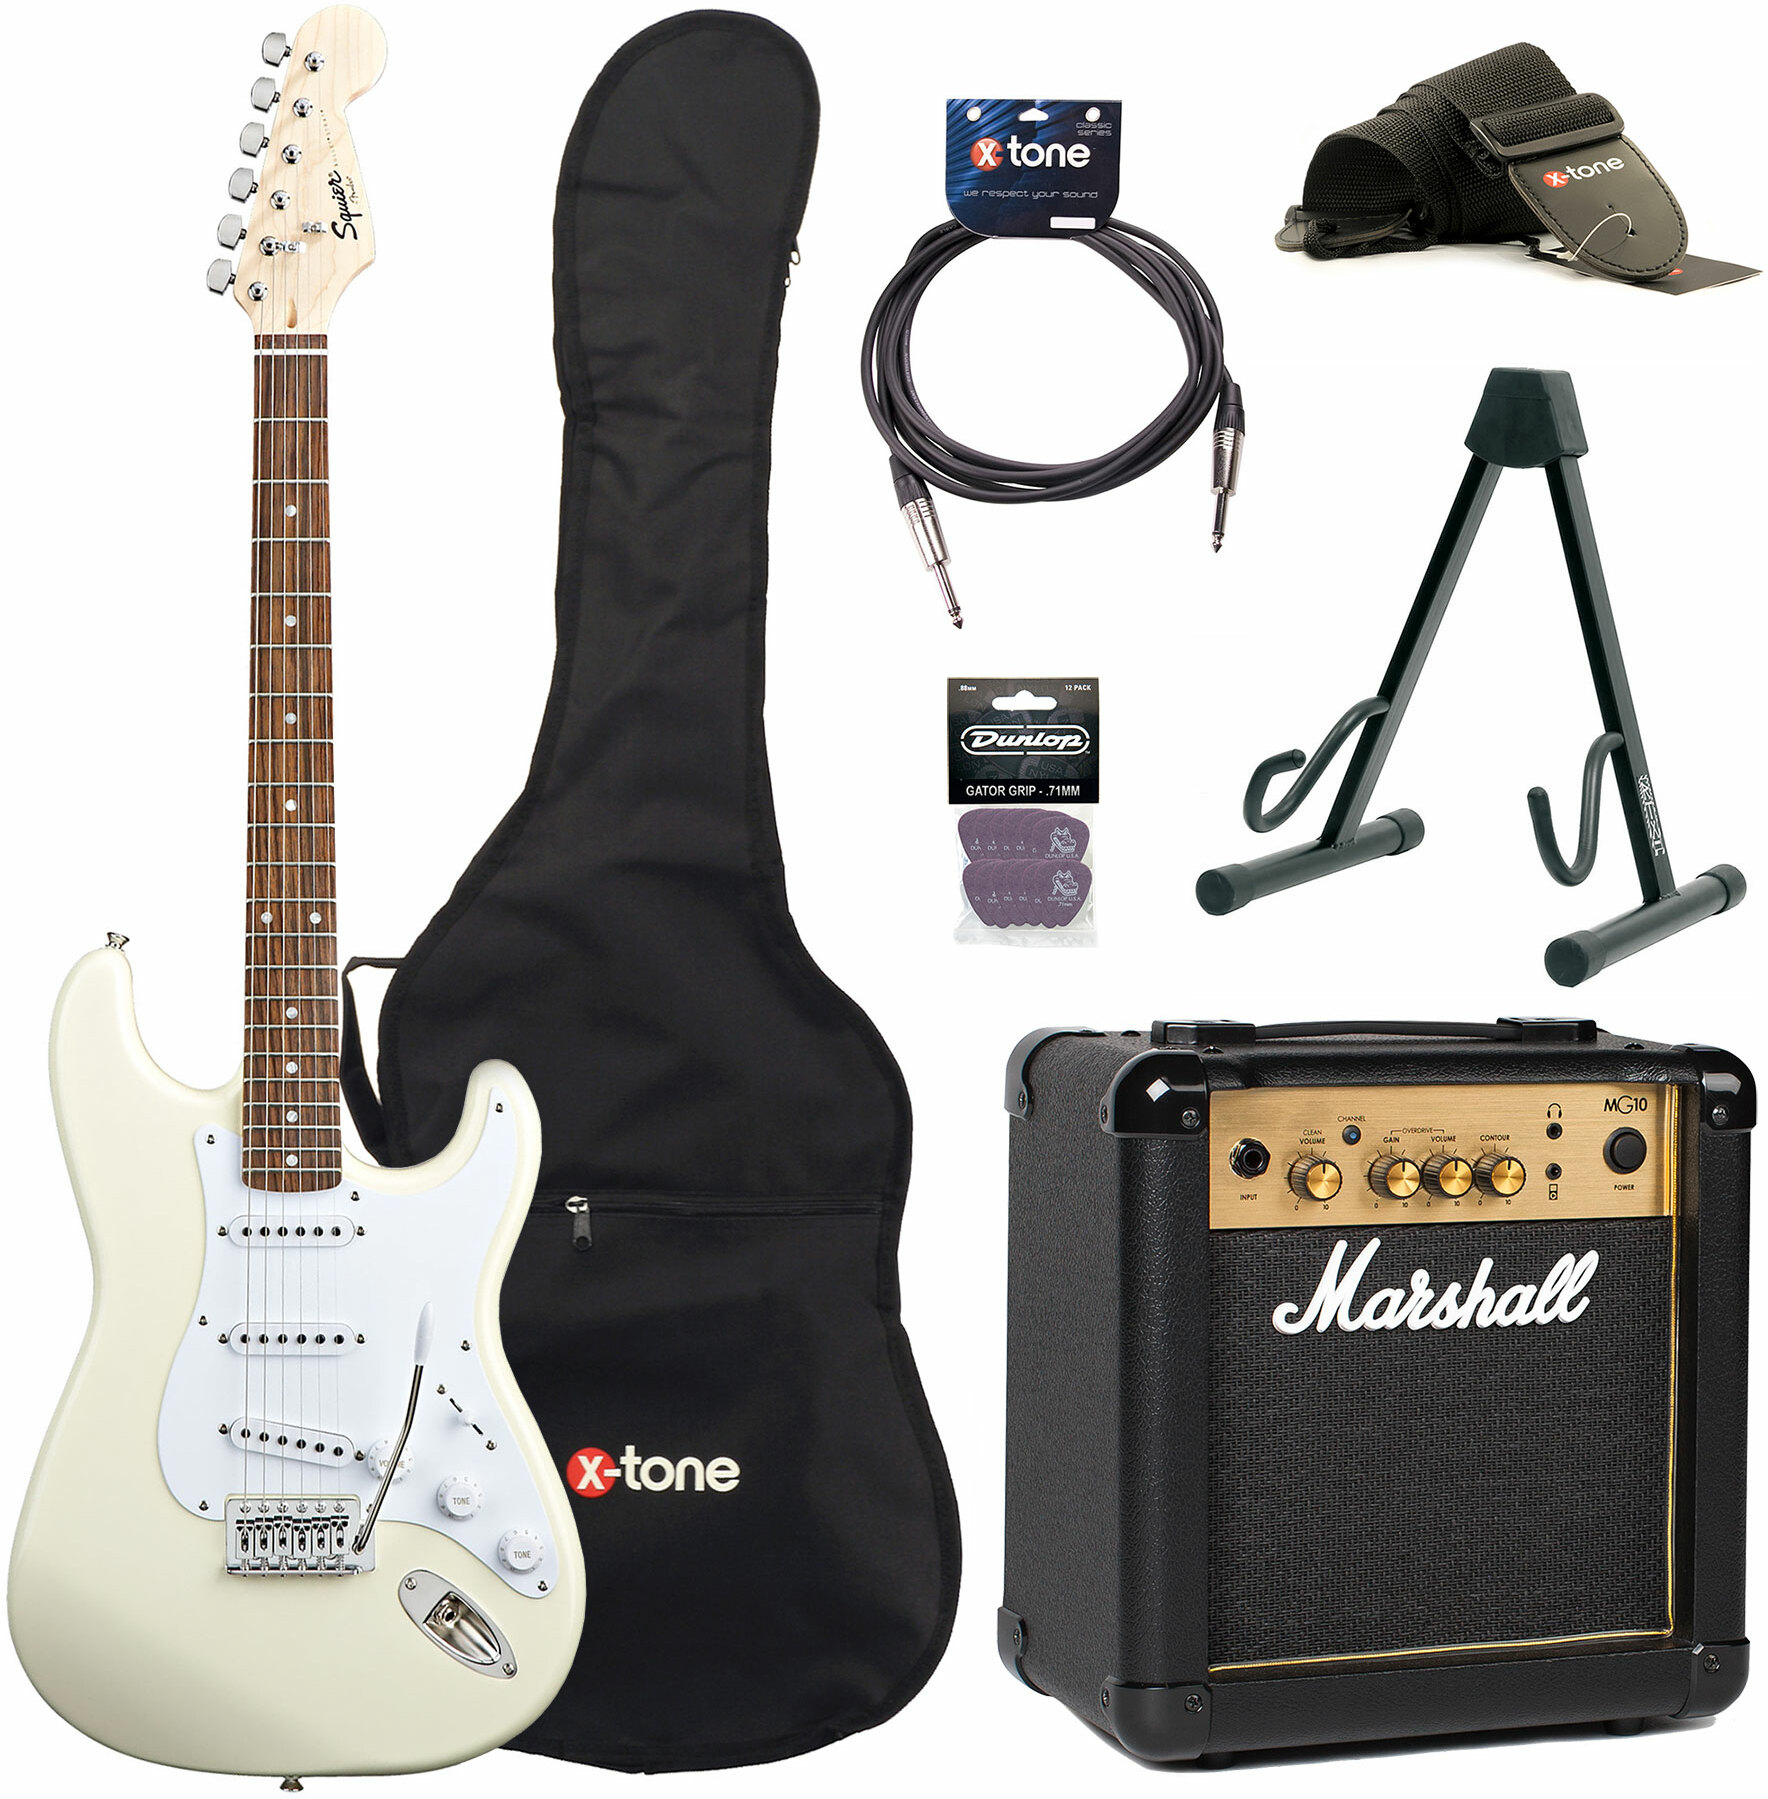 Squier Strat Bullet Sss + Marshall Mg10g + Access X-tone - Arctic White - Electric guitar set - Main picture